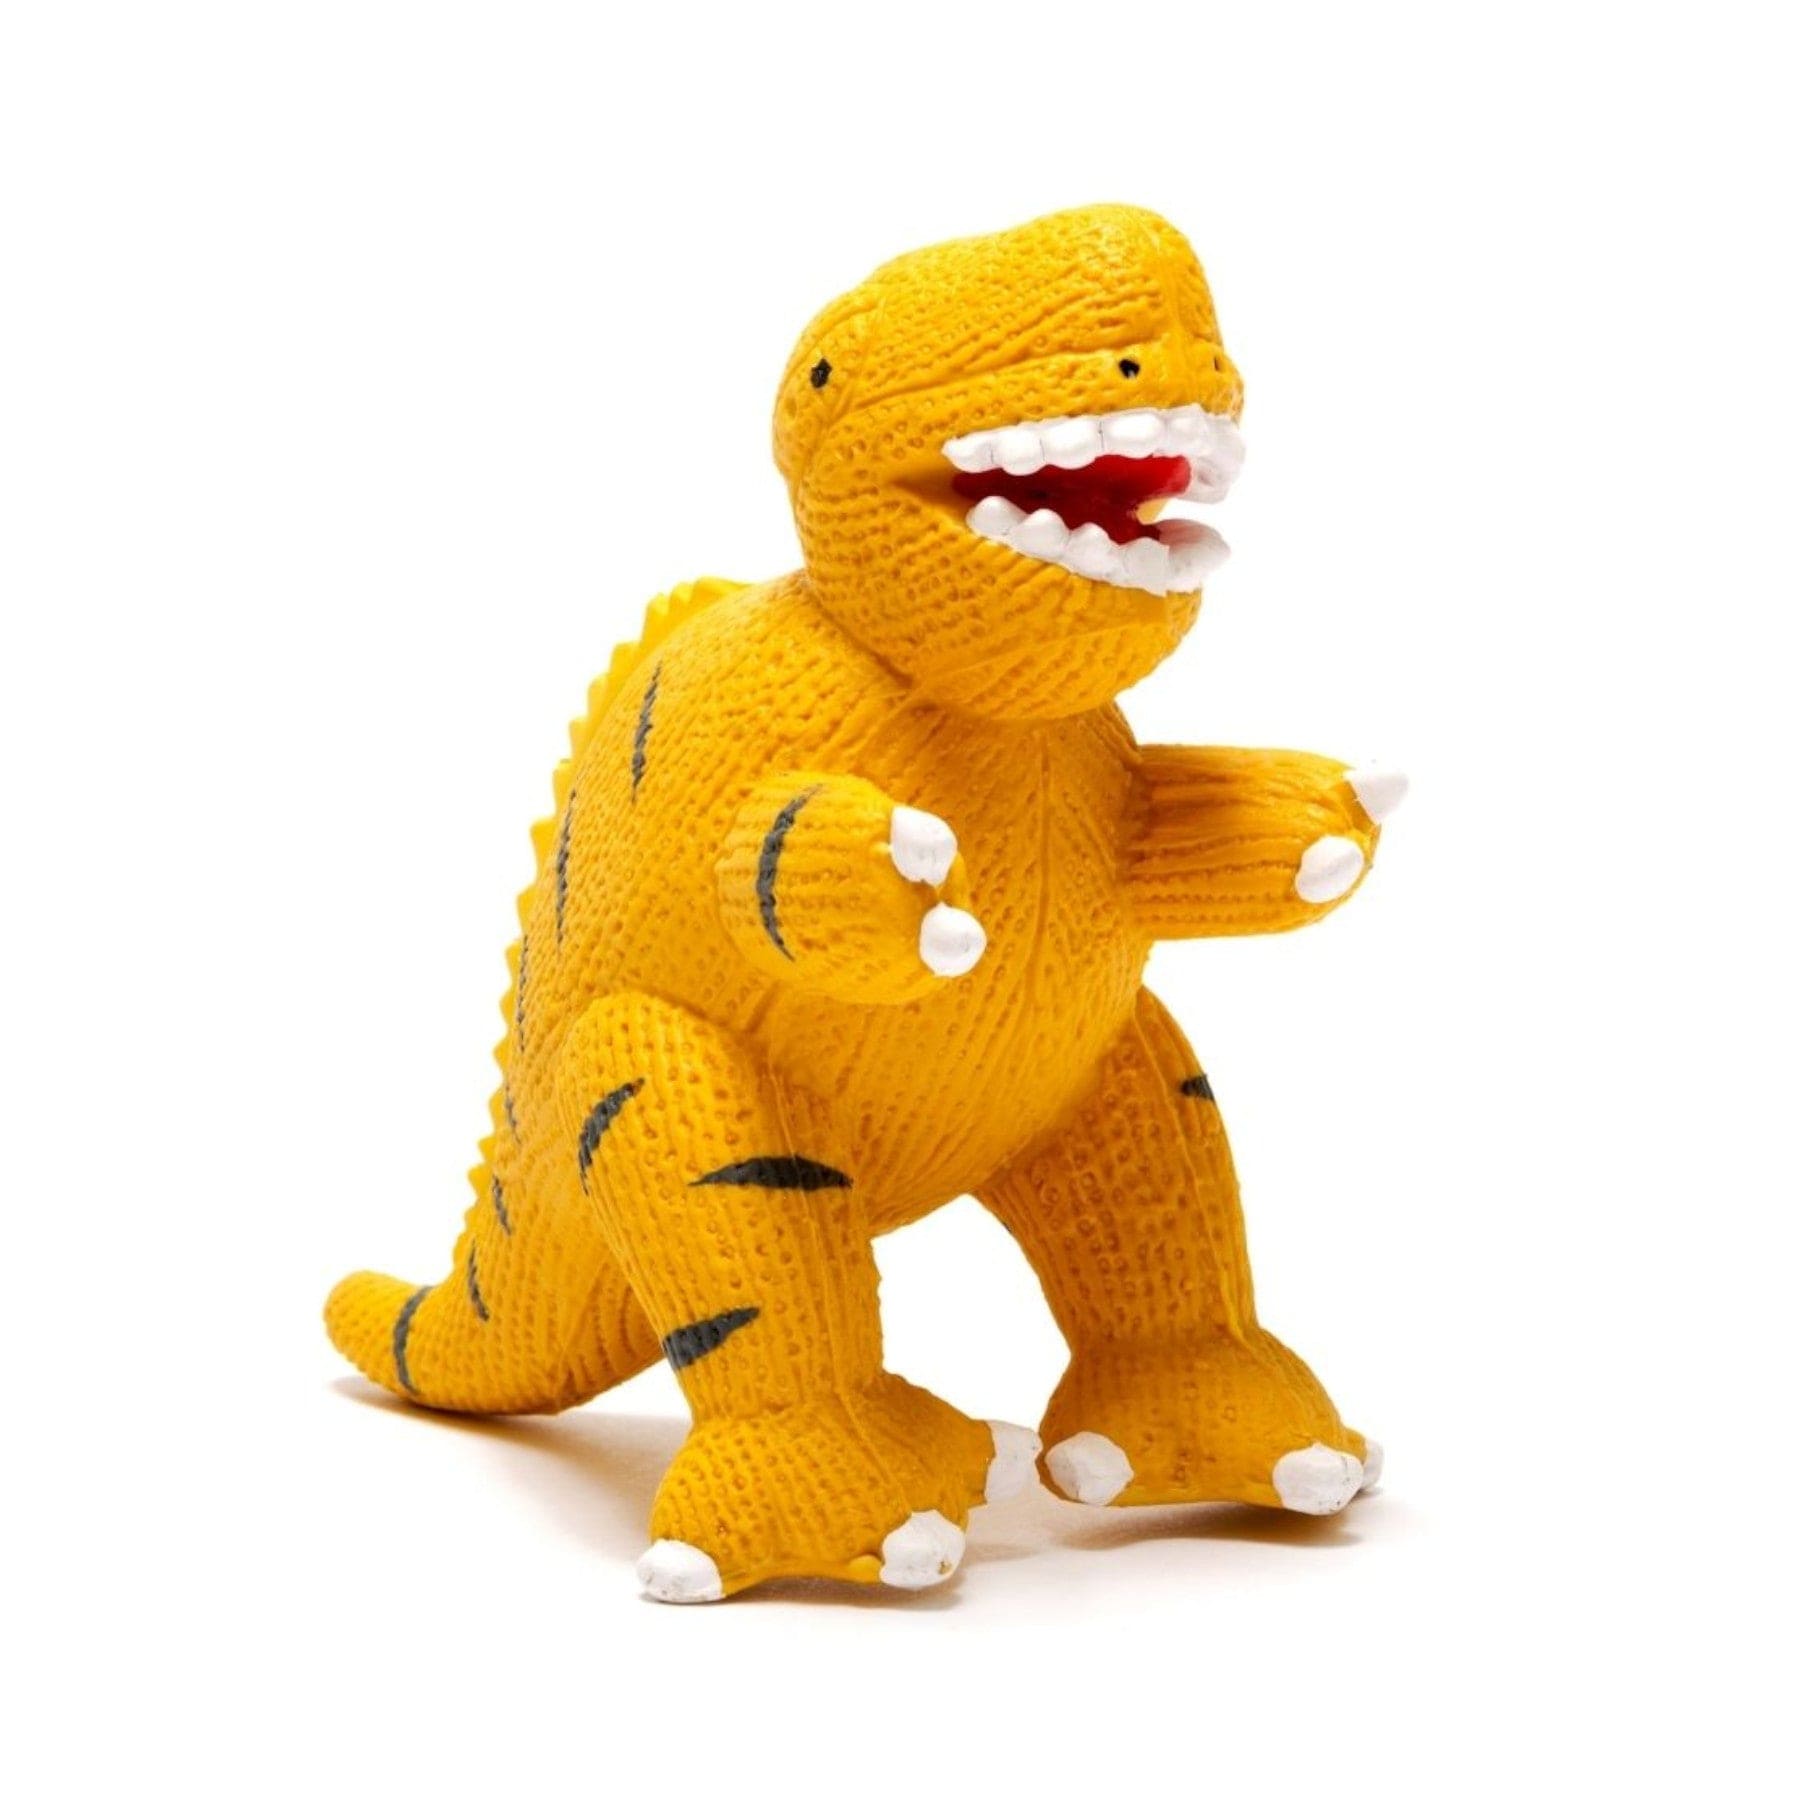 Yellow knitted dinosaur toy with black stripes standing on a white background